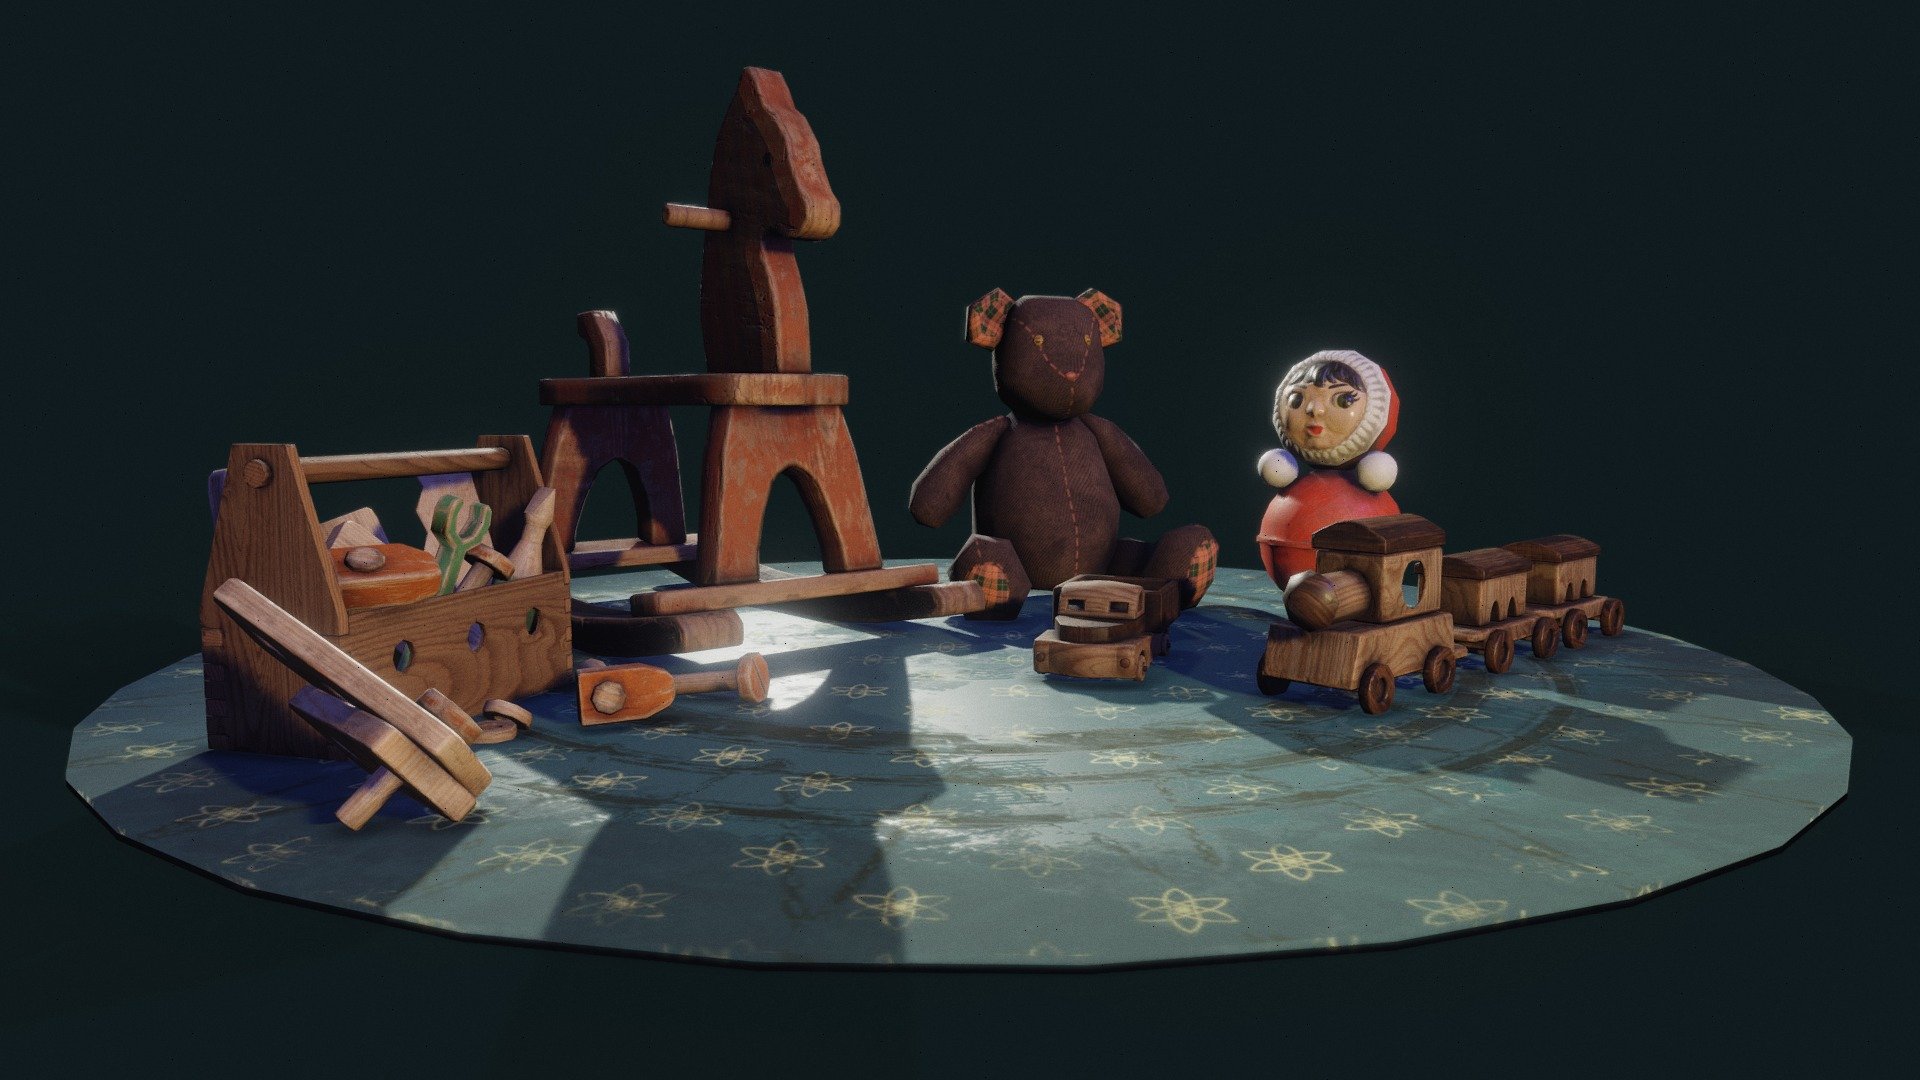 All the models are low poly and optimized. Stylized, old looking, with vintage touch

The set contains the following toys:
- wooden horse
- bear
- roly-poly tumbler doll
- instrument kit with various tools
- train
- car

The textures include base color, roughness and normal, 2K - Wooden toys - Buy Royalty Free 3D model by Julius (@darlingjulia0) 3d model